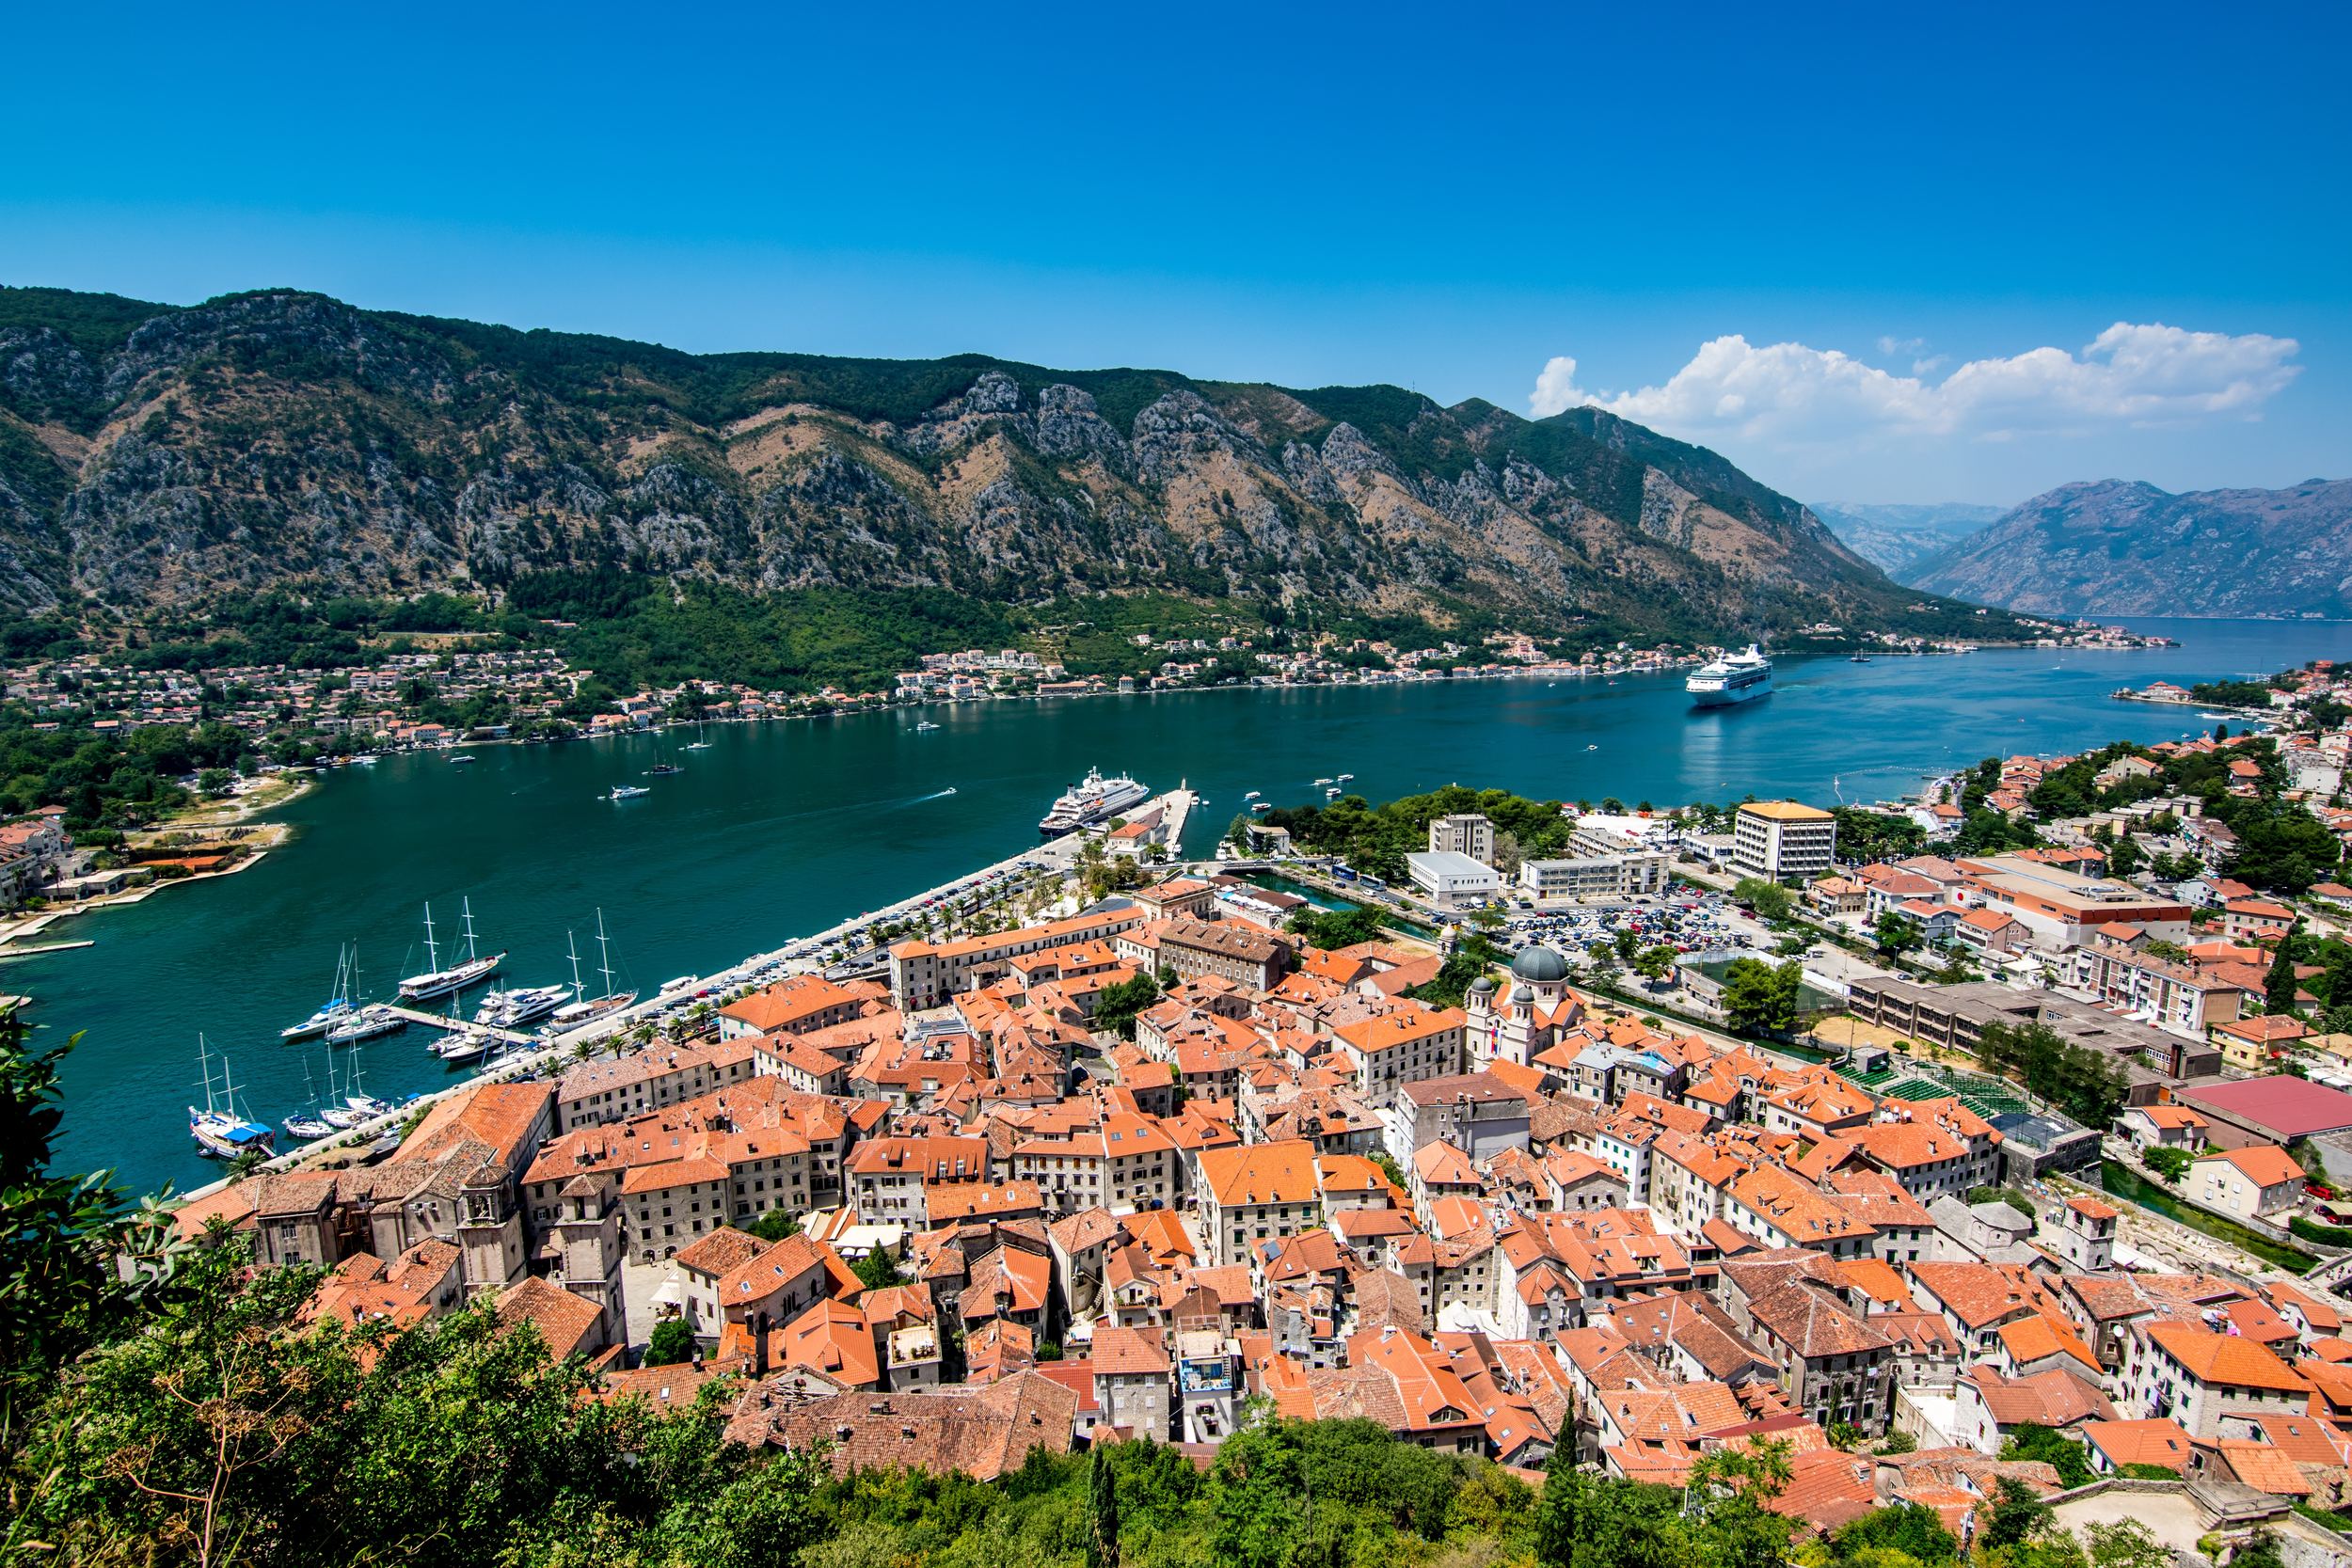 Best Places to Visit in Montenegro